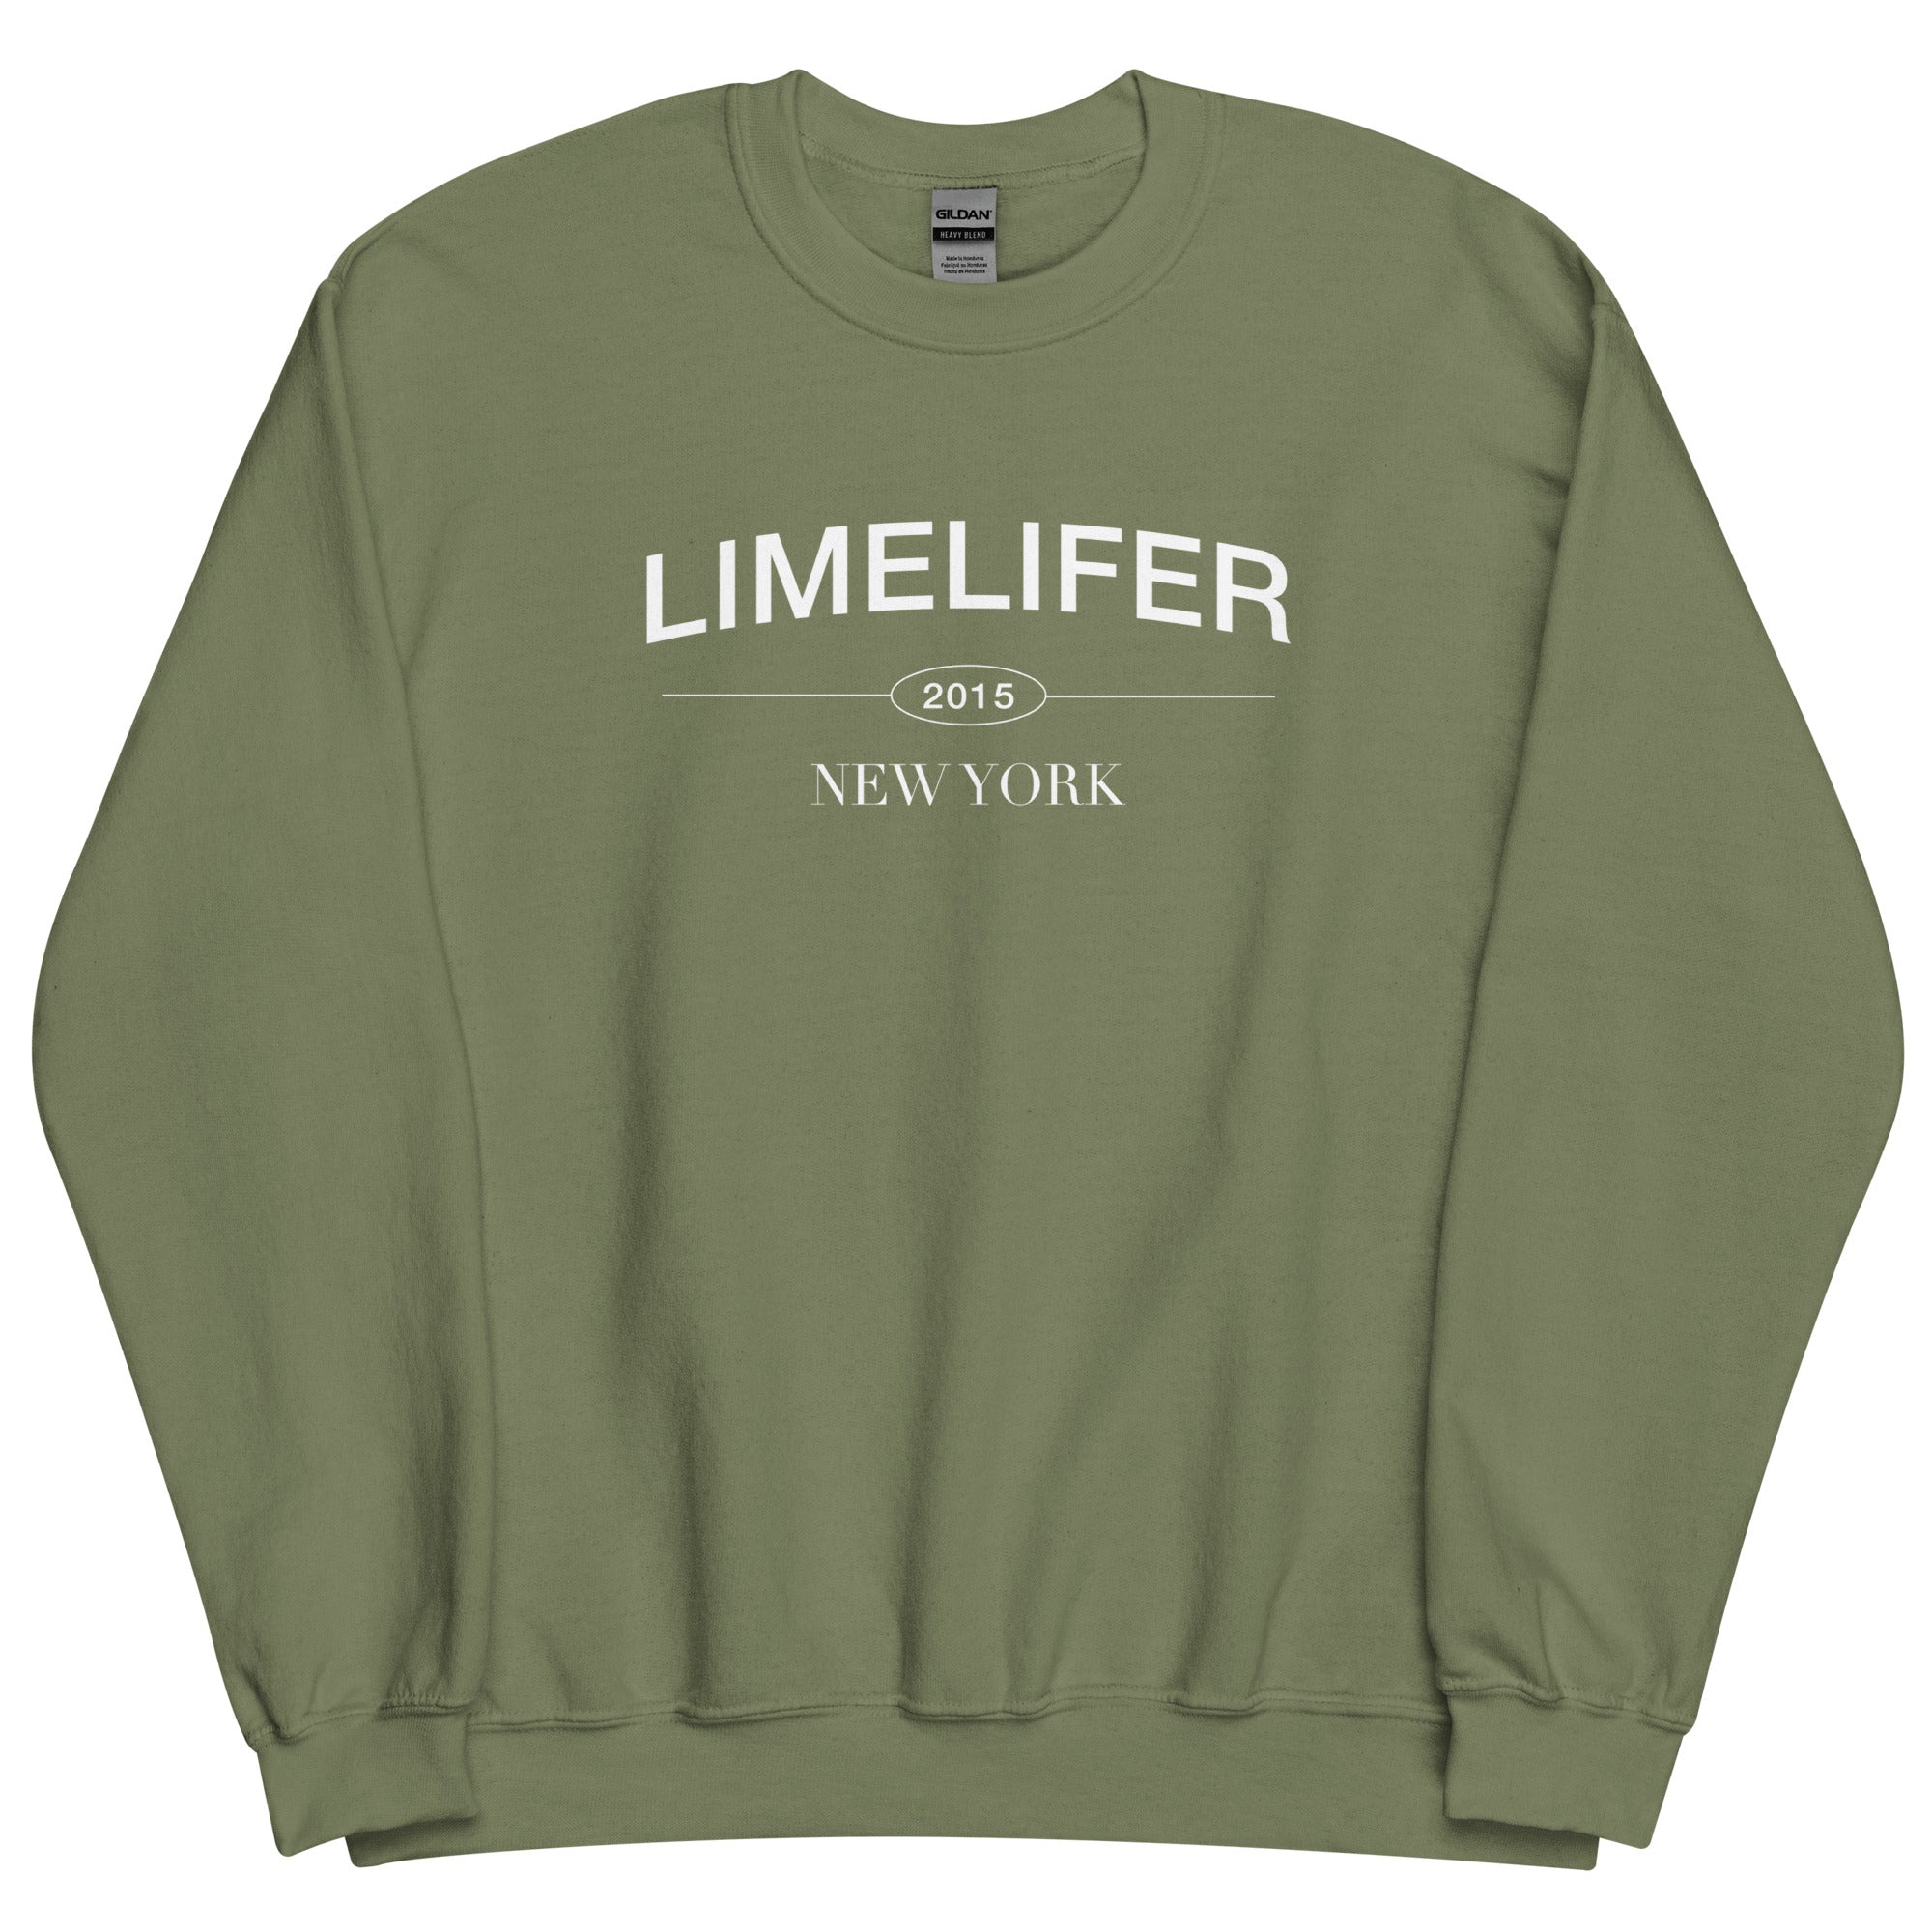 LIMELIFER NY - Unisex Sweatshirt in Dark Heather, Black and Military Green